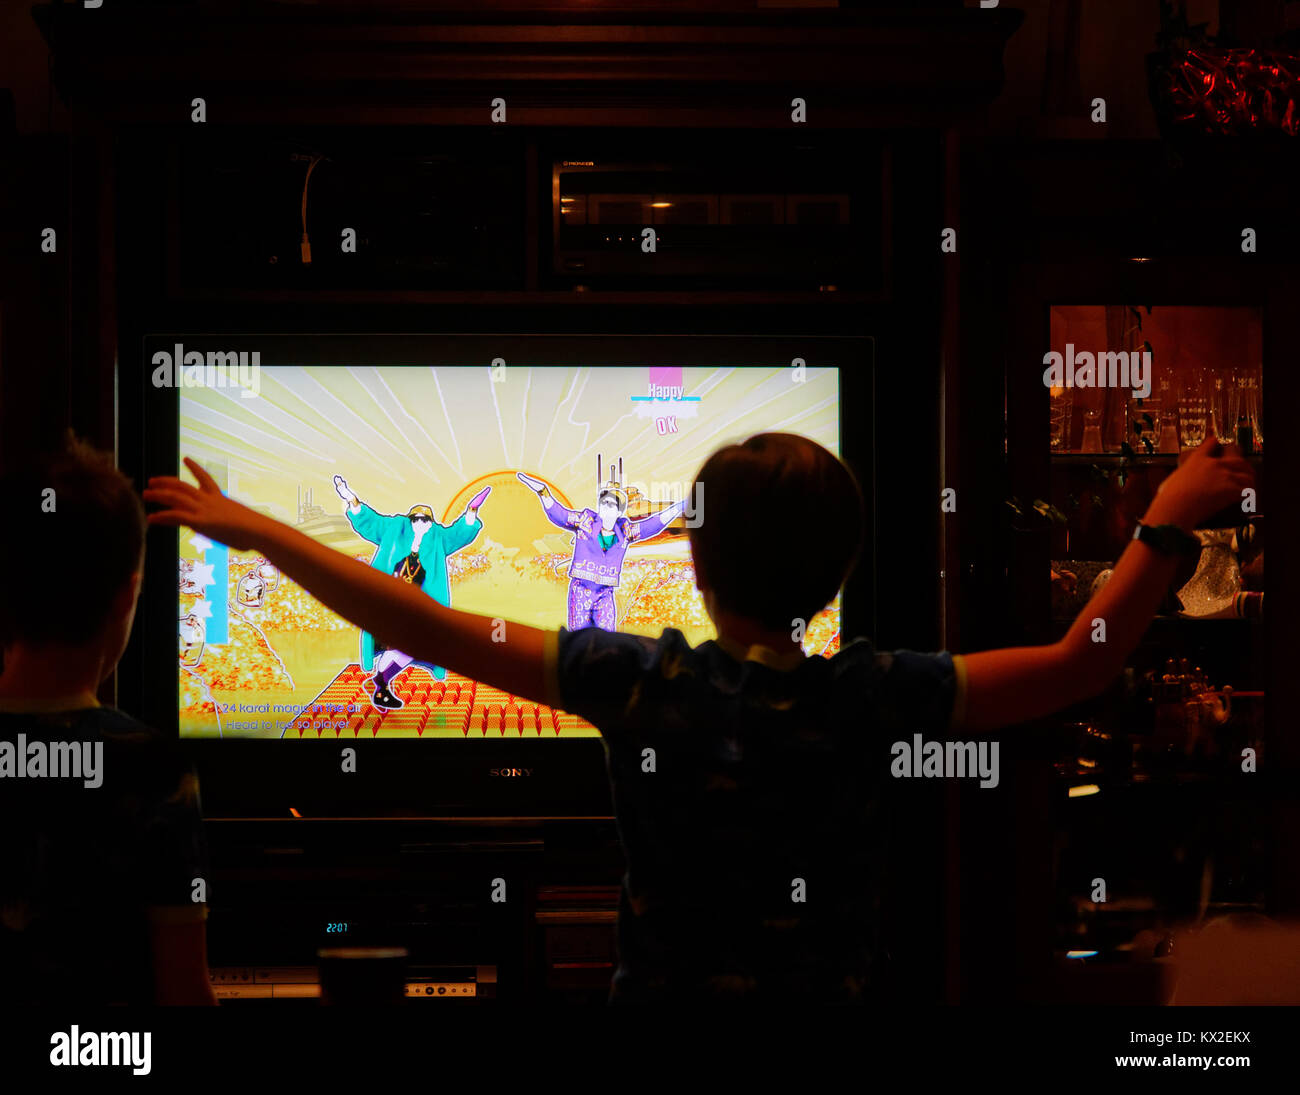 A young boy (9 yr old) dancing in front of the TV to the PlayStation 4 game Just Dance Stock Photo